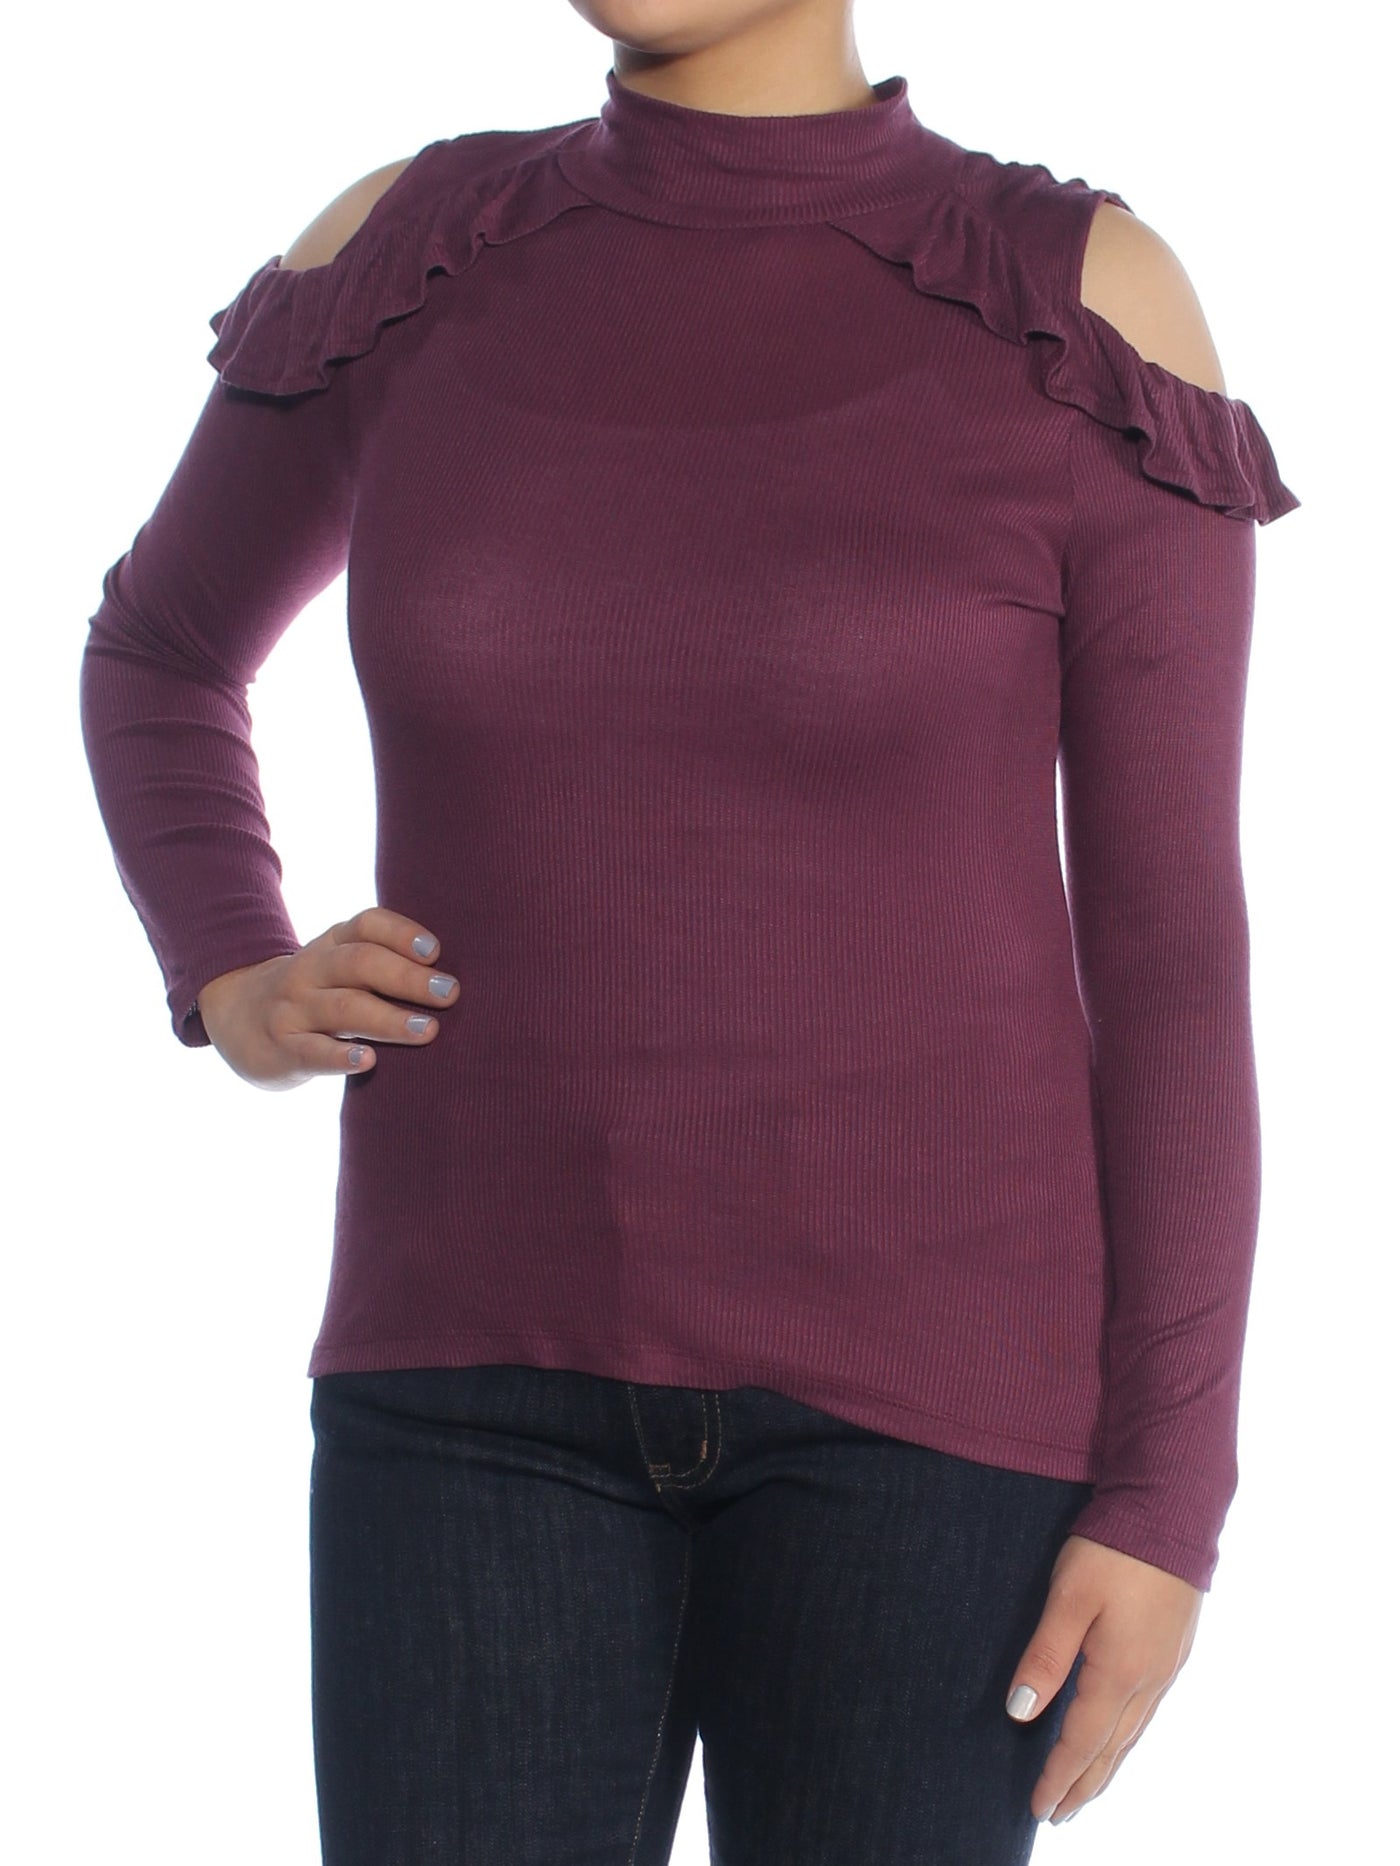 MAISON JULES Womens Purple Cold Shoulder Ruffled Long Sleeve Turtle Neck Top